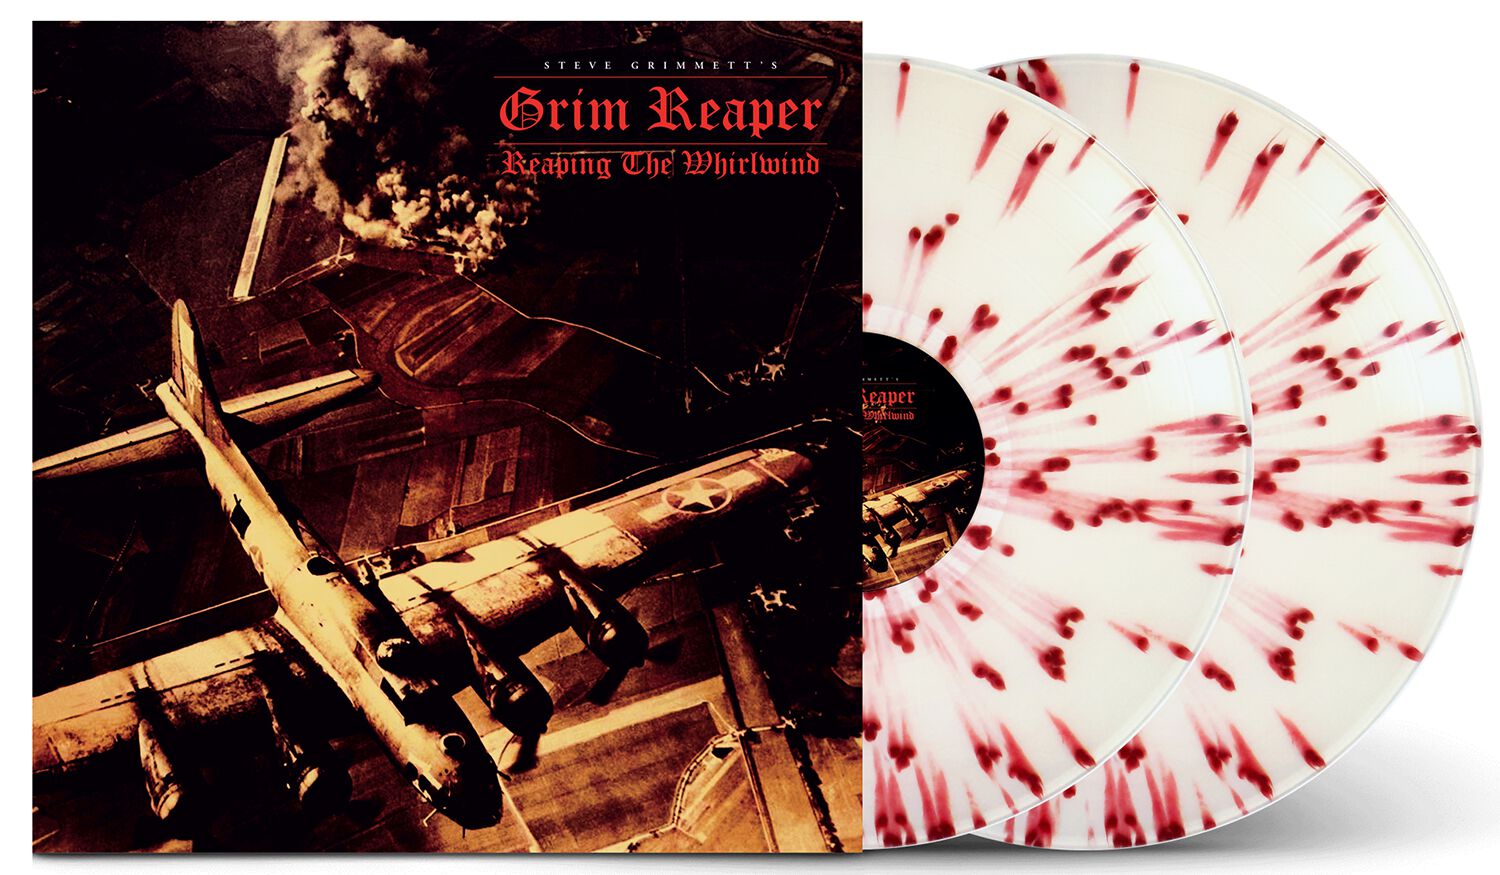 Grim Reaper Reaping the whirlwind - Live British Steel Festival 2018 LP splattered